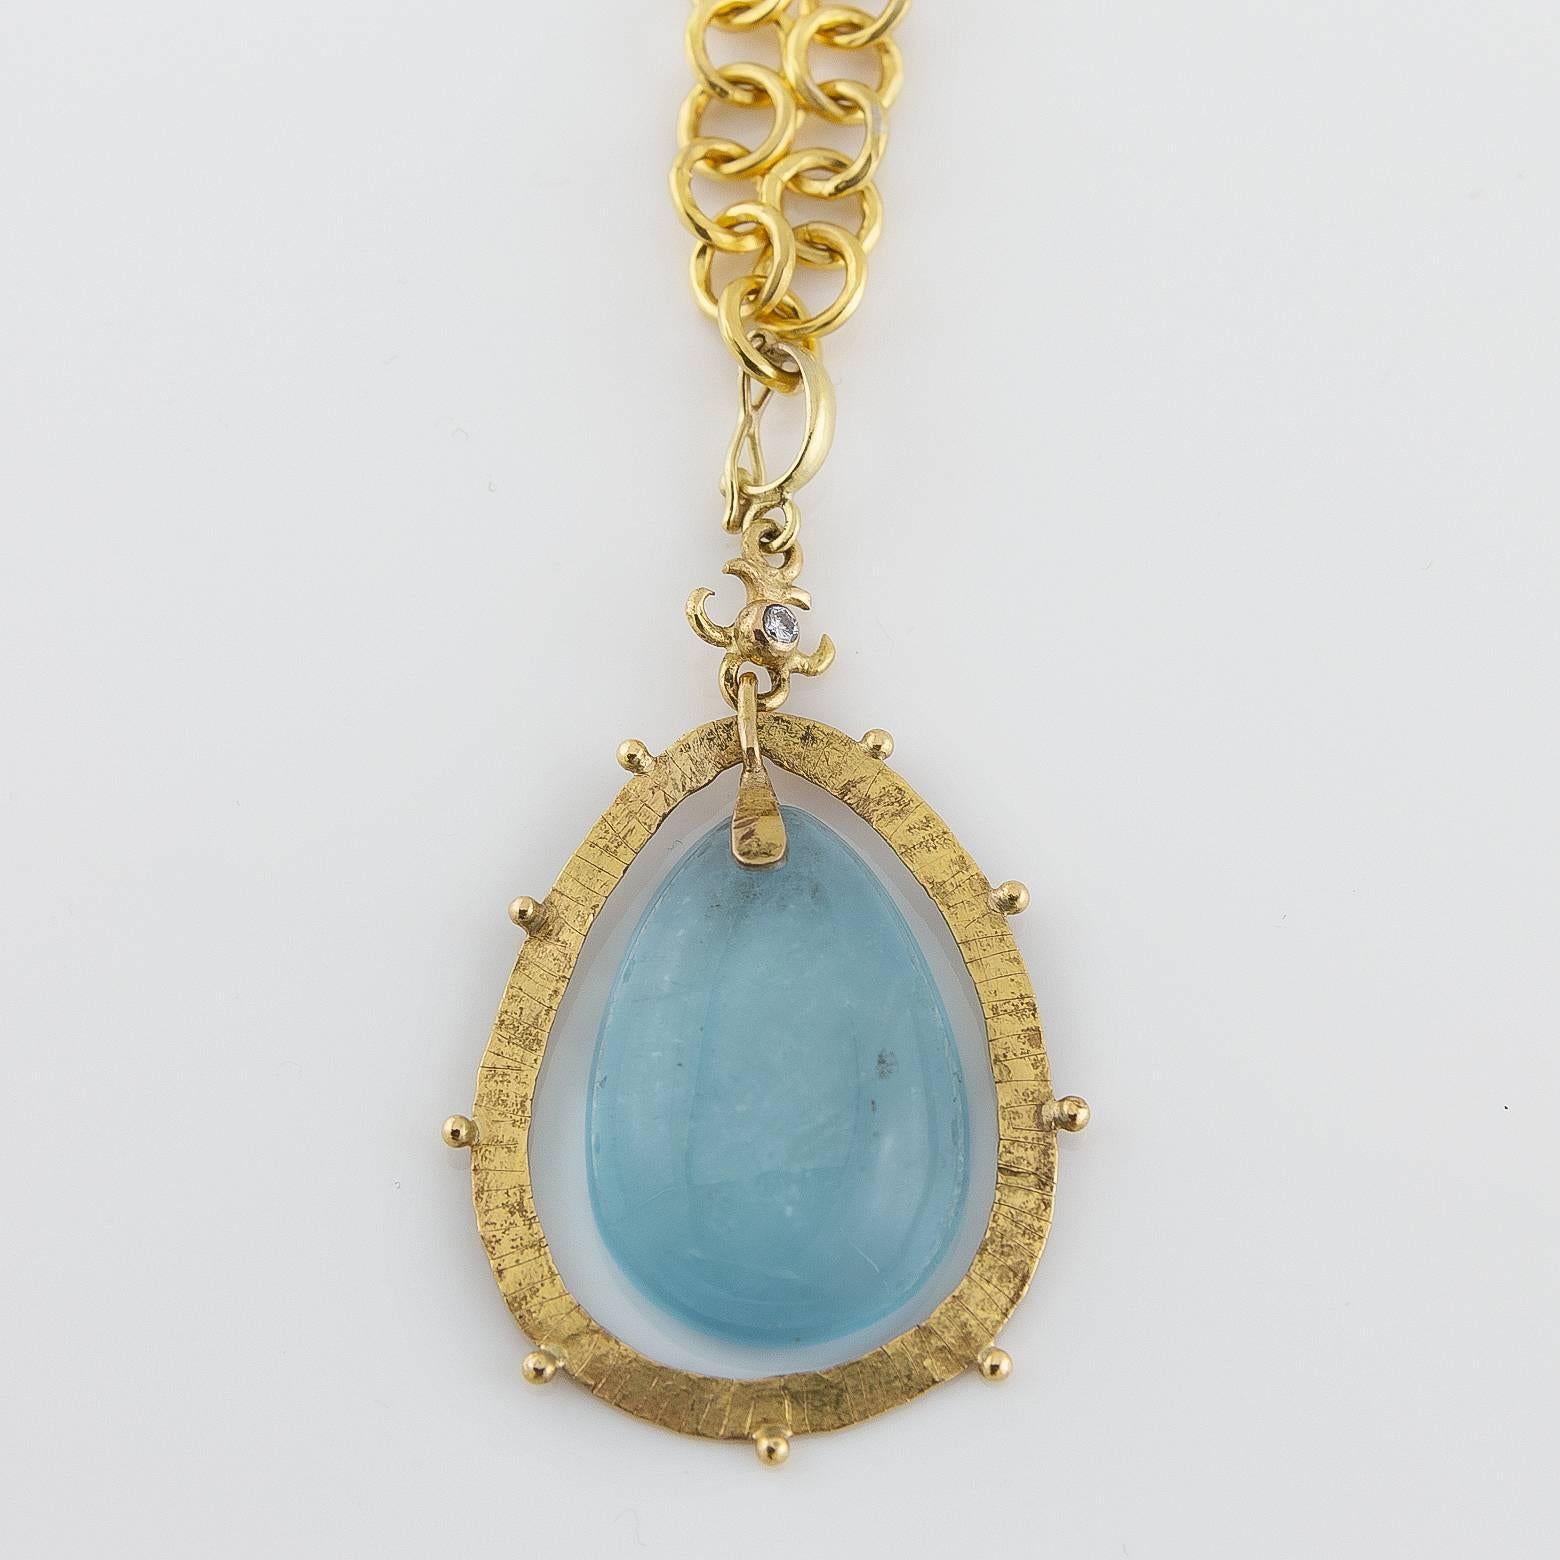 This is a large gorgeous aquamarine pendant enhanced with a tiny diamond on top for added flare. The sparkle to this milky aquamarine piece is absolutely stunning and the texture to the 18K yellow gold is fit for a goddess. Every part of this piece